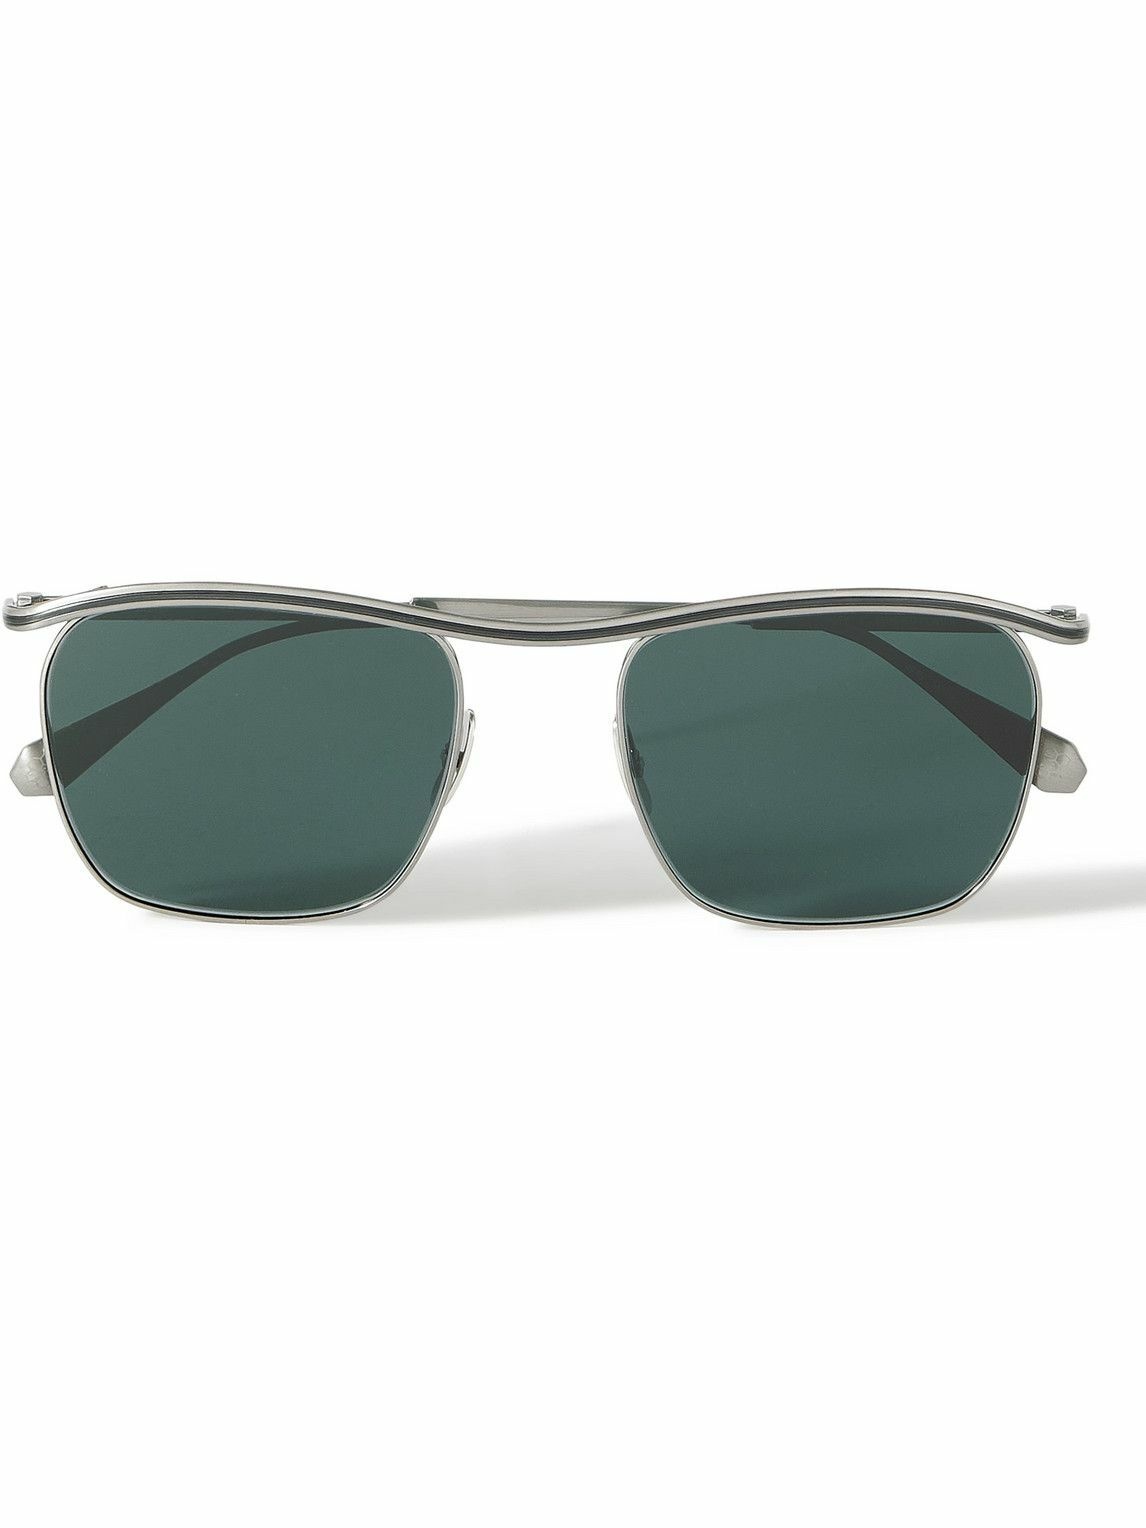 Photo: Mr Leight - Owsley S Aviator-Style Brushed Silver-Tone Sunglasses